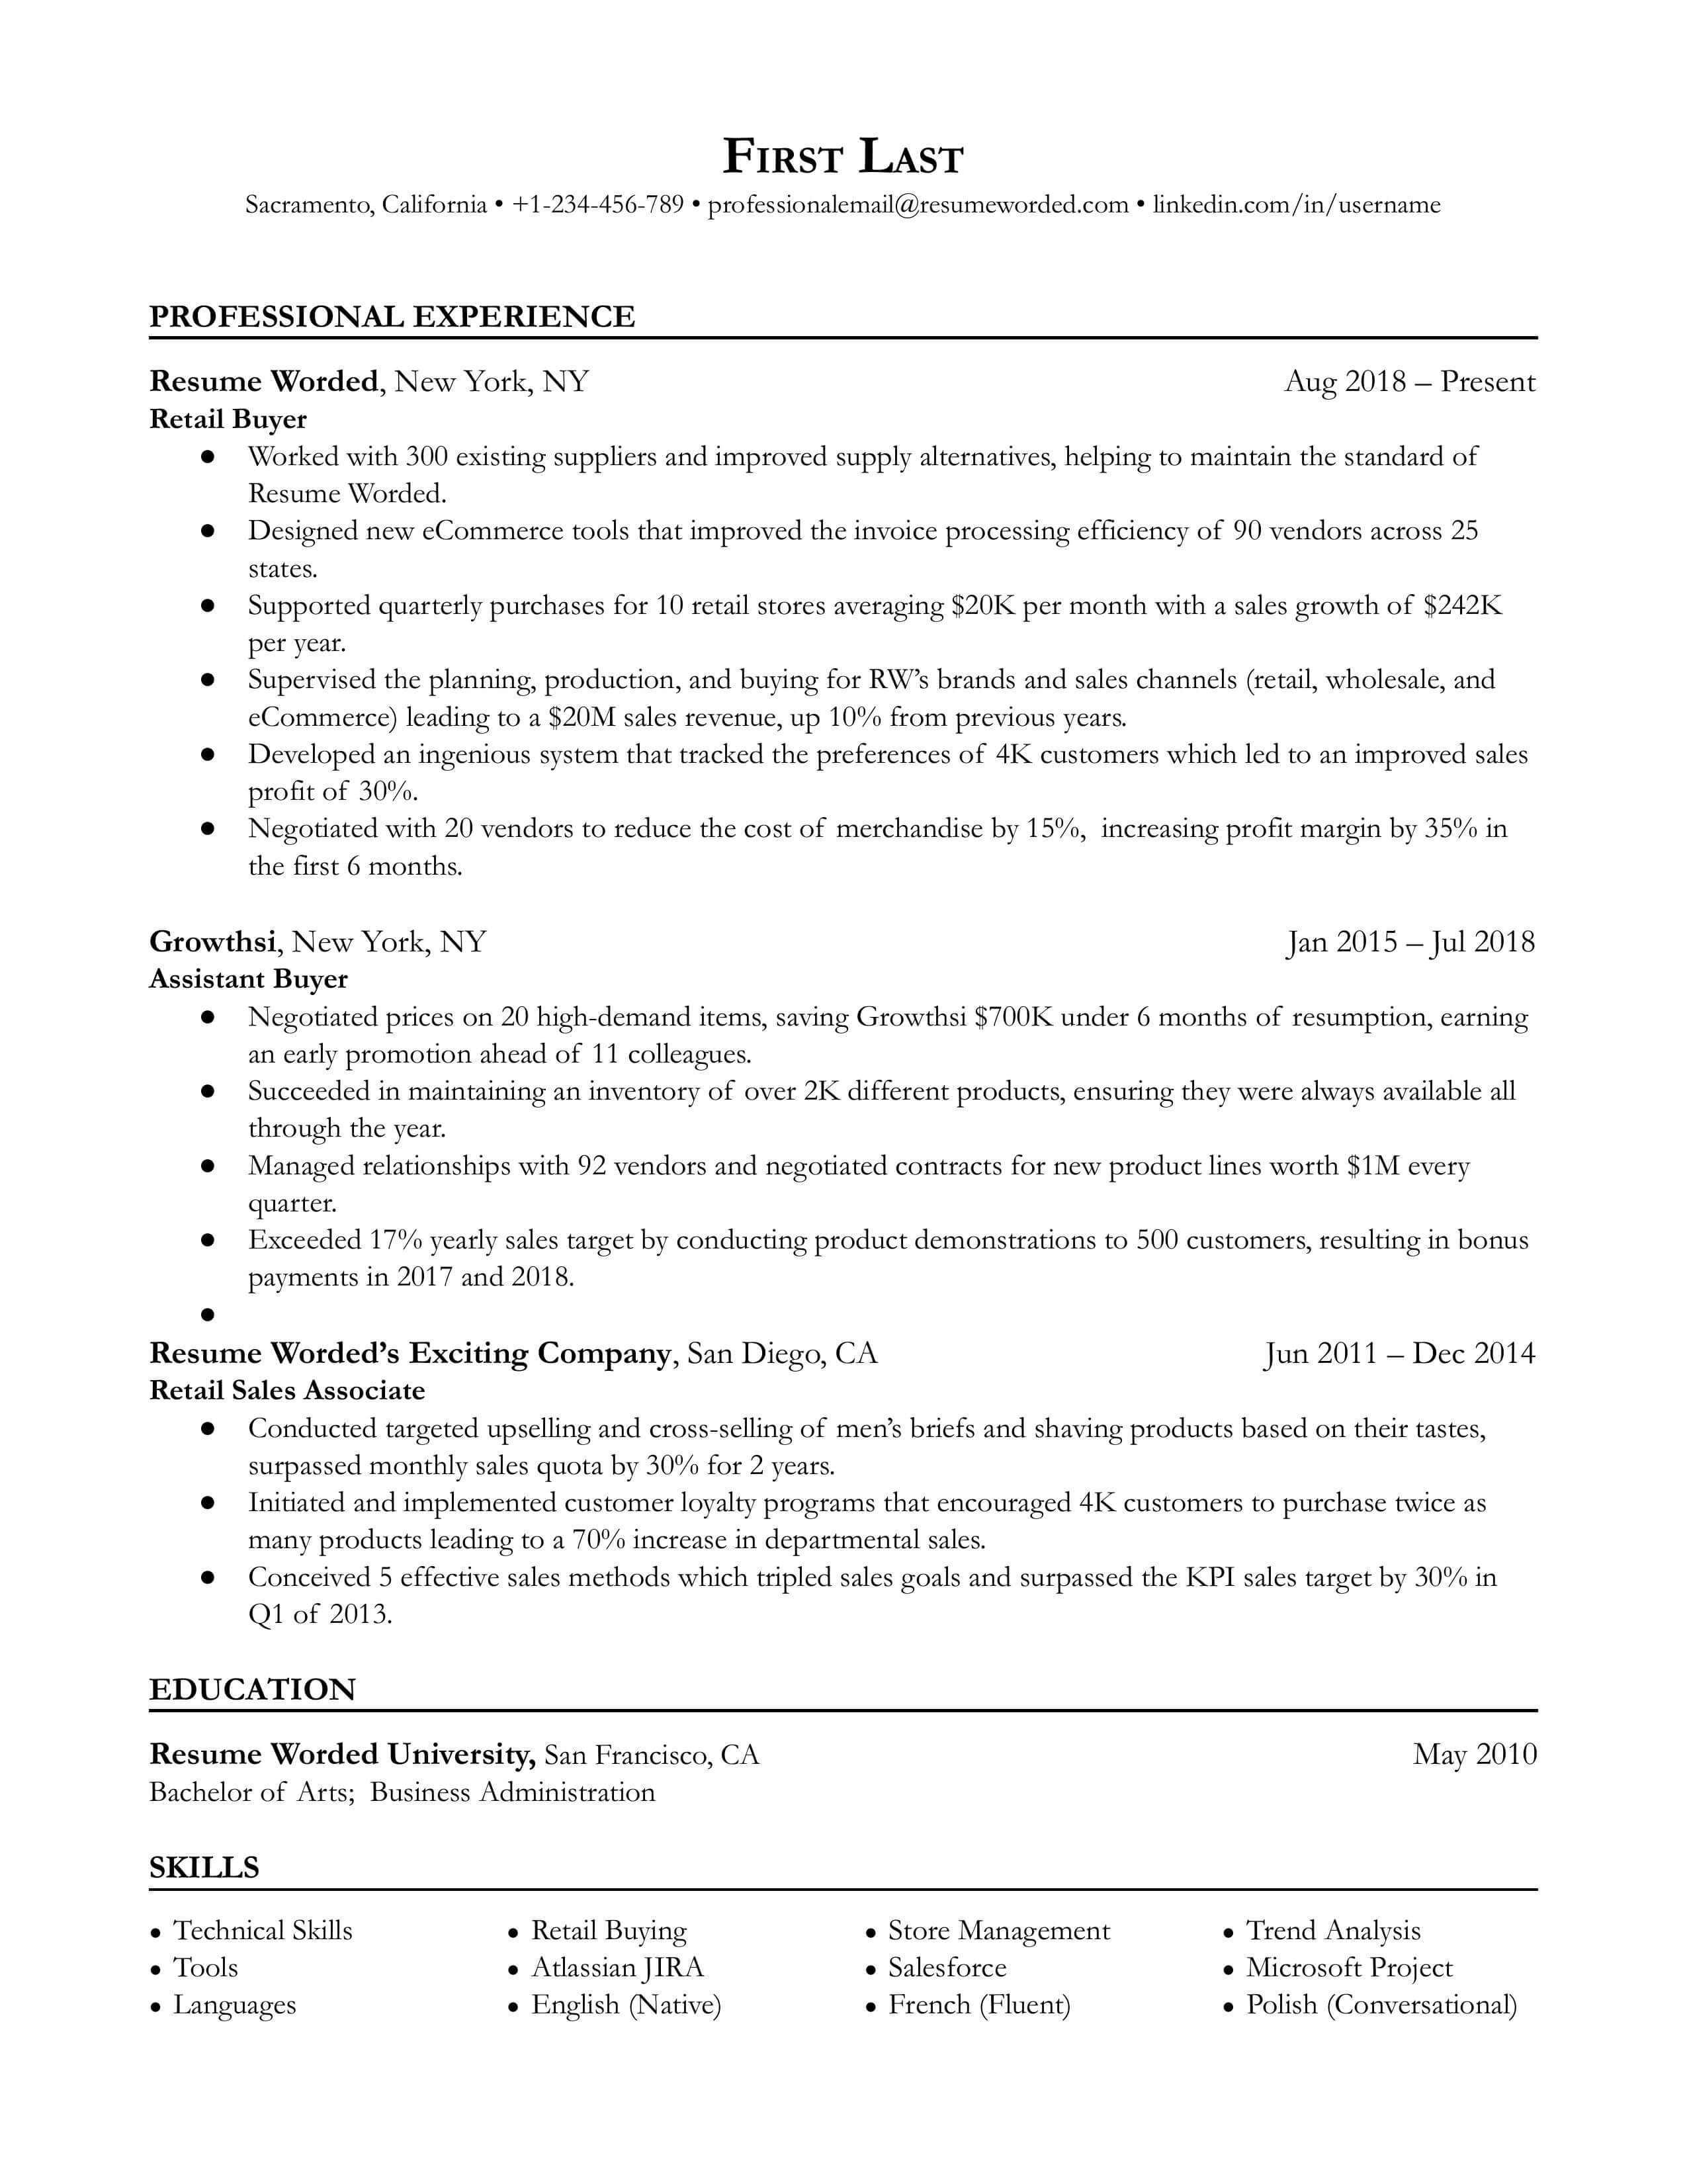 A retail buyer resume template that emphasizes relevant work experience over additional information